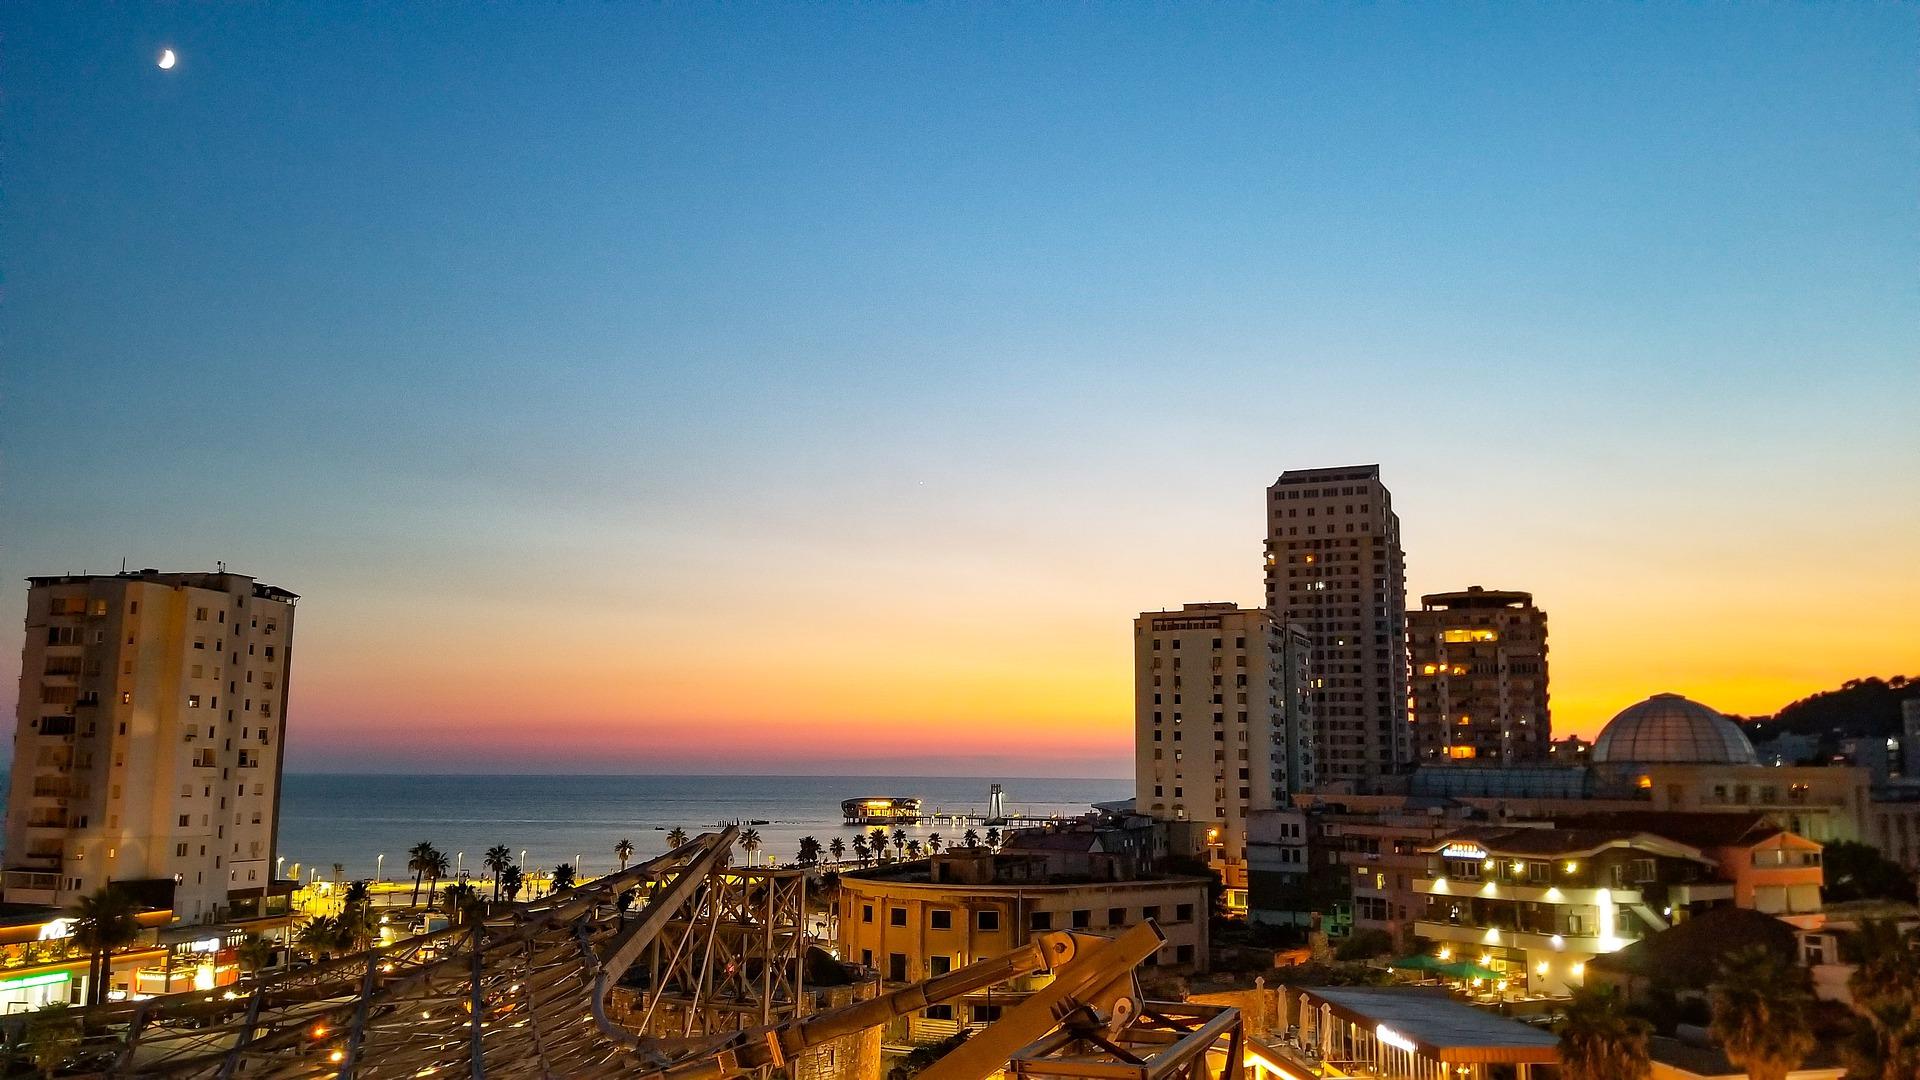 Architecture in Durrës at dawn